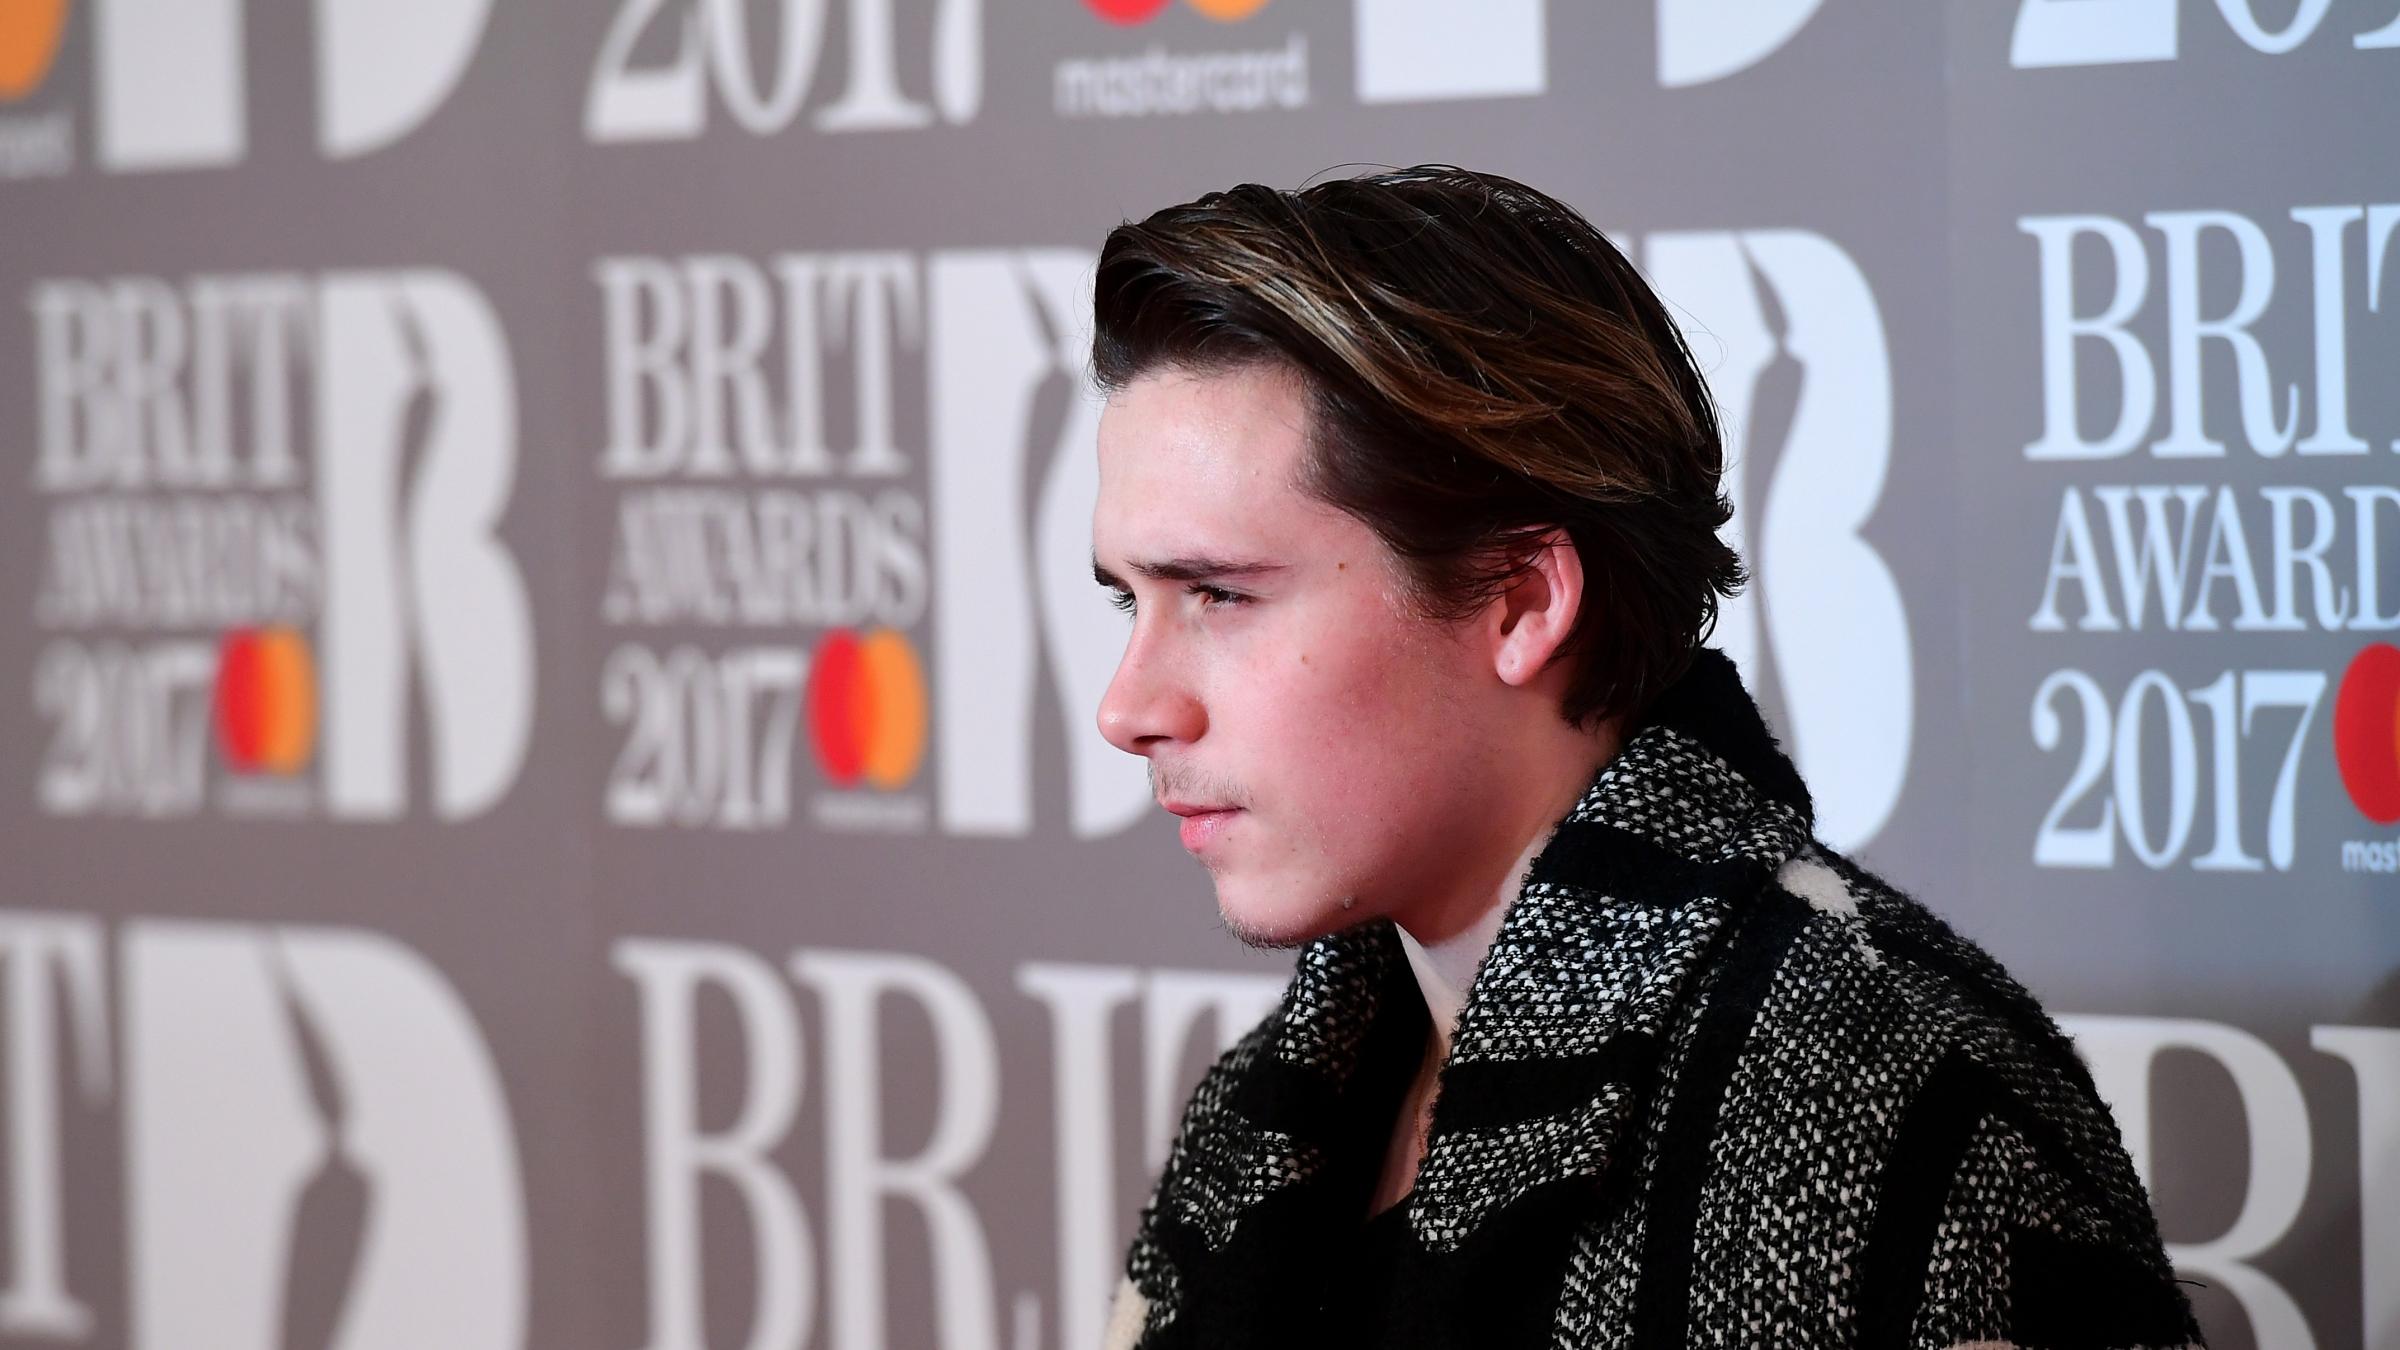 Brooklyn Beckham reveals he hopes to make photography his career